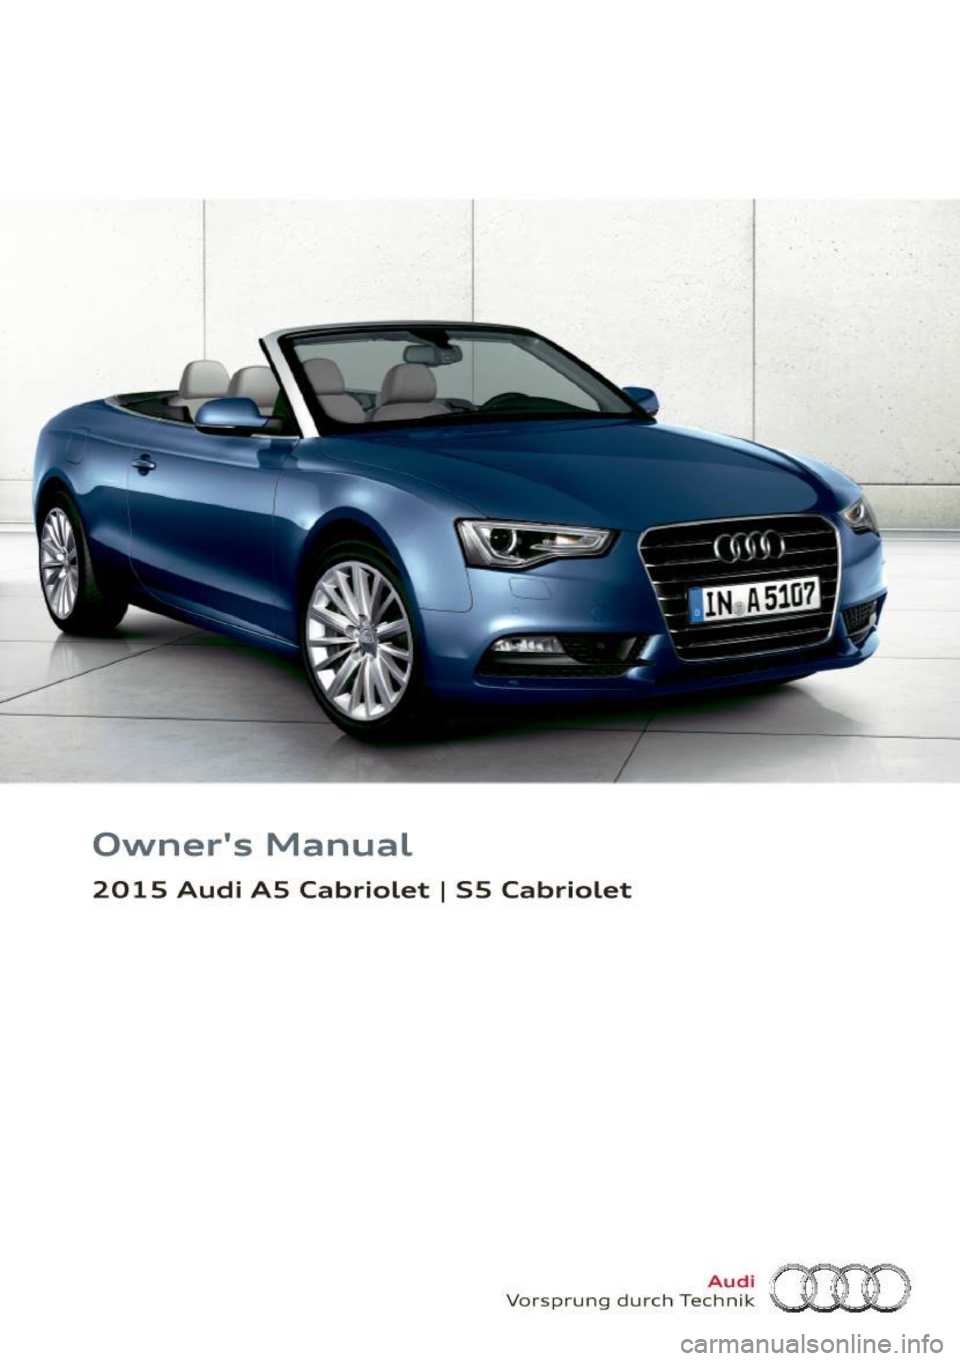 AUDI A5 CABRIOLET 2015  Owners Manual Owners  Manual 
2015  Audi  AS  Cabriolet I S5  Cabriolet 
Vorsprung durch Tee~~?~ (HO  